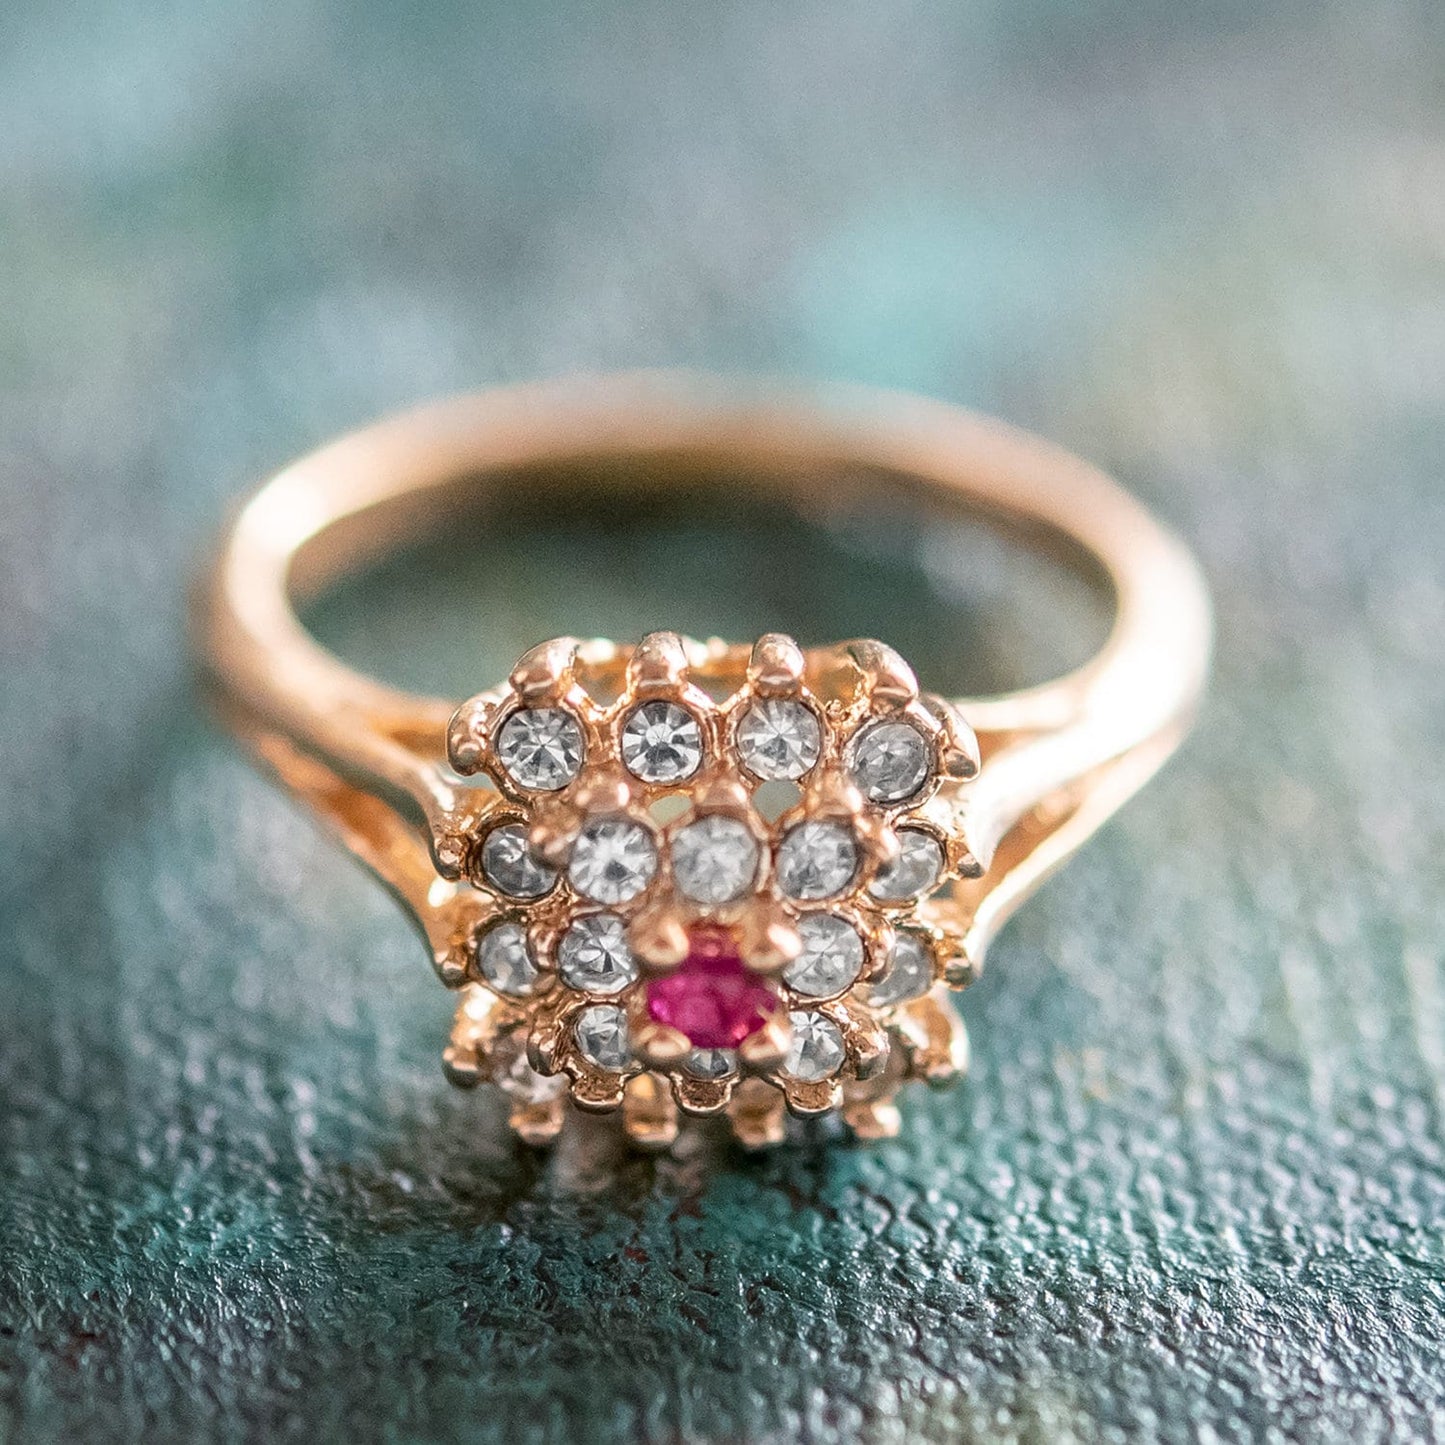 Vintage Ring Genuine Ruby and Clear Swarovski Crystal Ring 18k Gold  R885 - Limited Stock - Never Worn